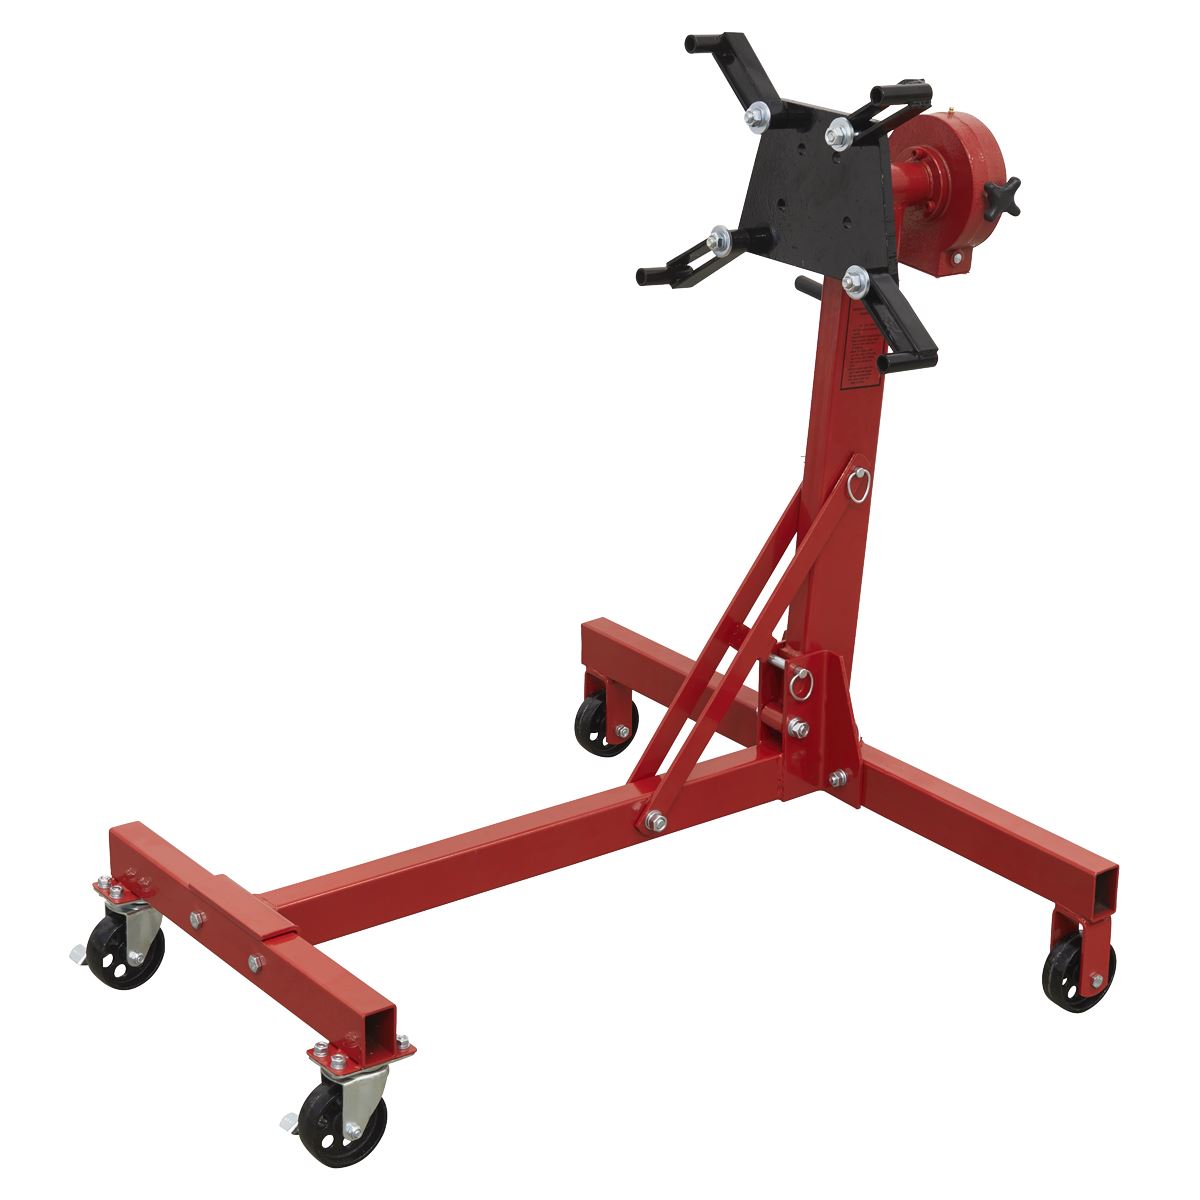 Sealey Folding 360º Rotating Engine Stand with Geared Handle Drive, 450kg Capacity